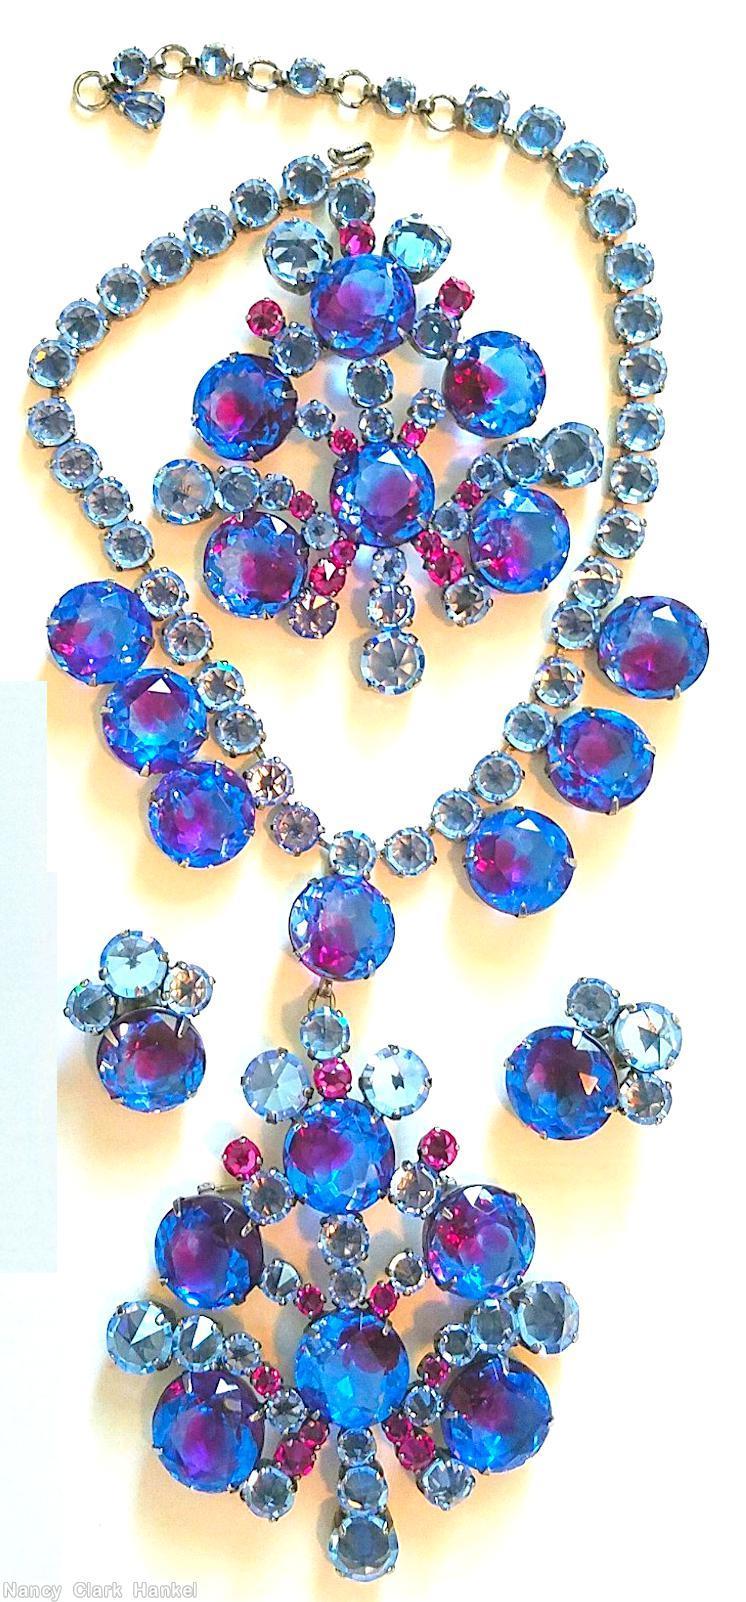 Schreiner single chain of faceted chaton with 7 drippy large faceted chaton dangling radial shield shaped pendant large faceted chaton center 6 large faceted chaton bicolor sapphire ruby ice blue jewelry